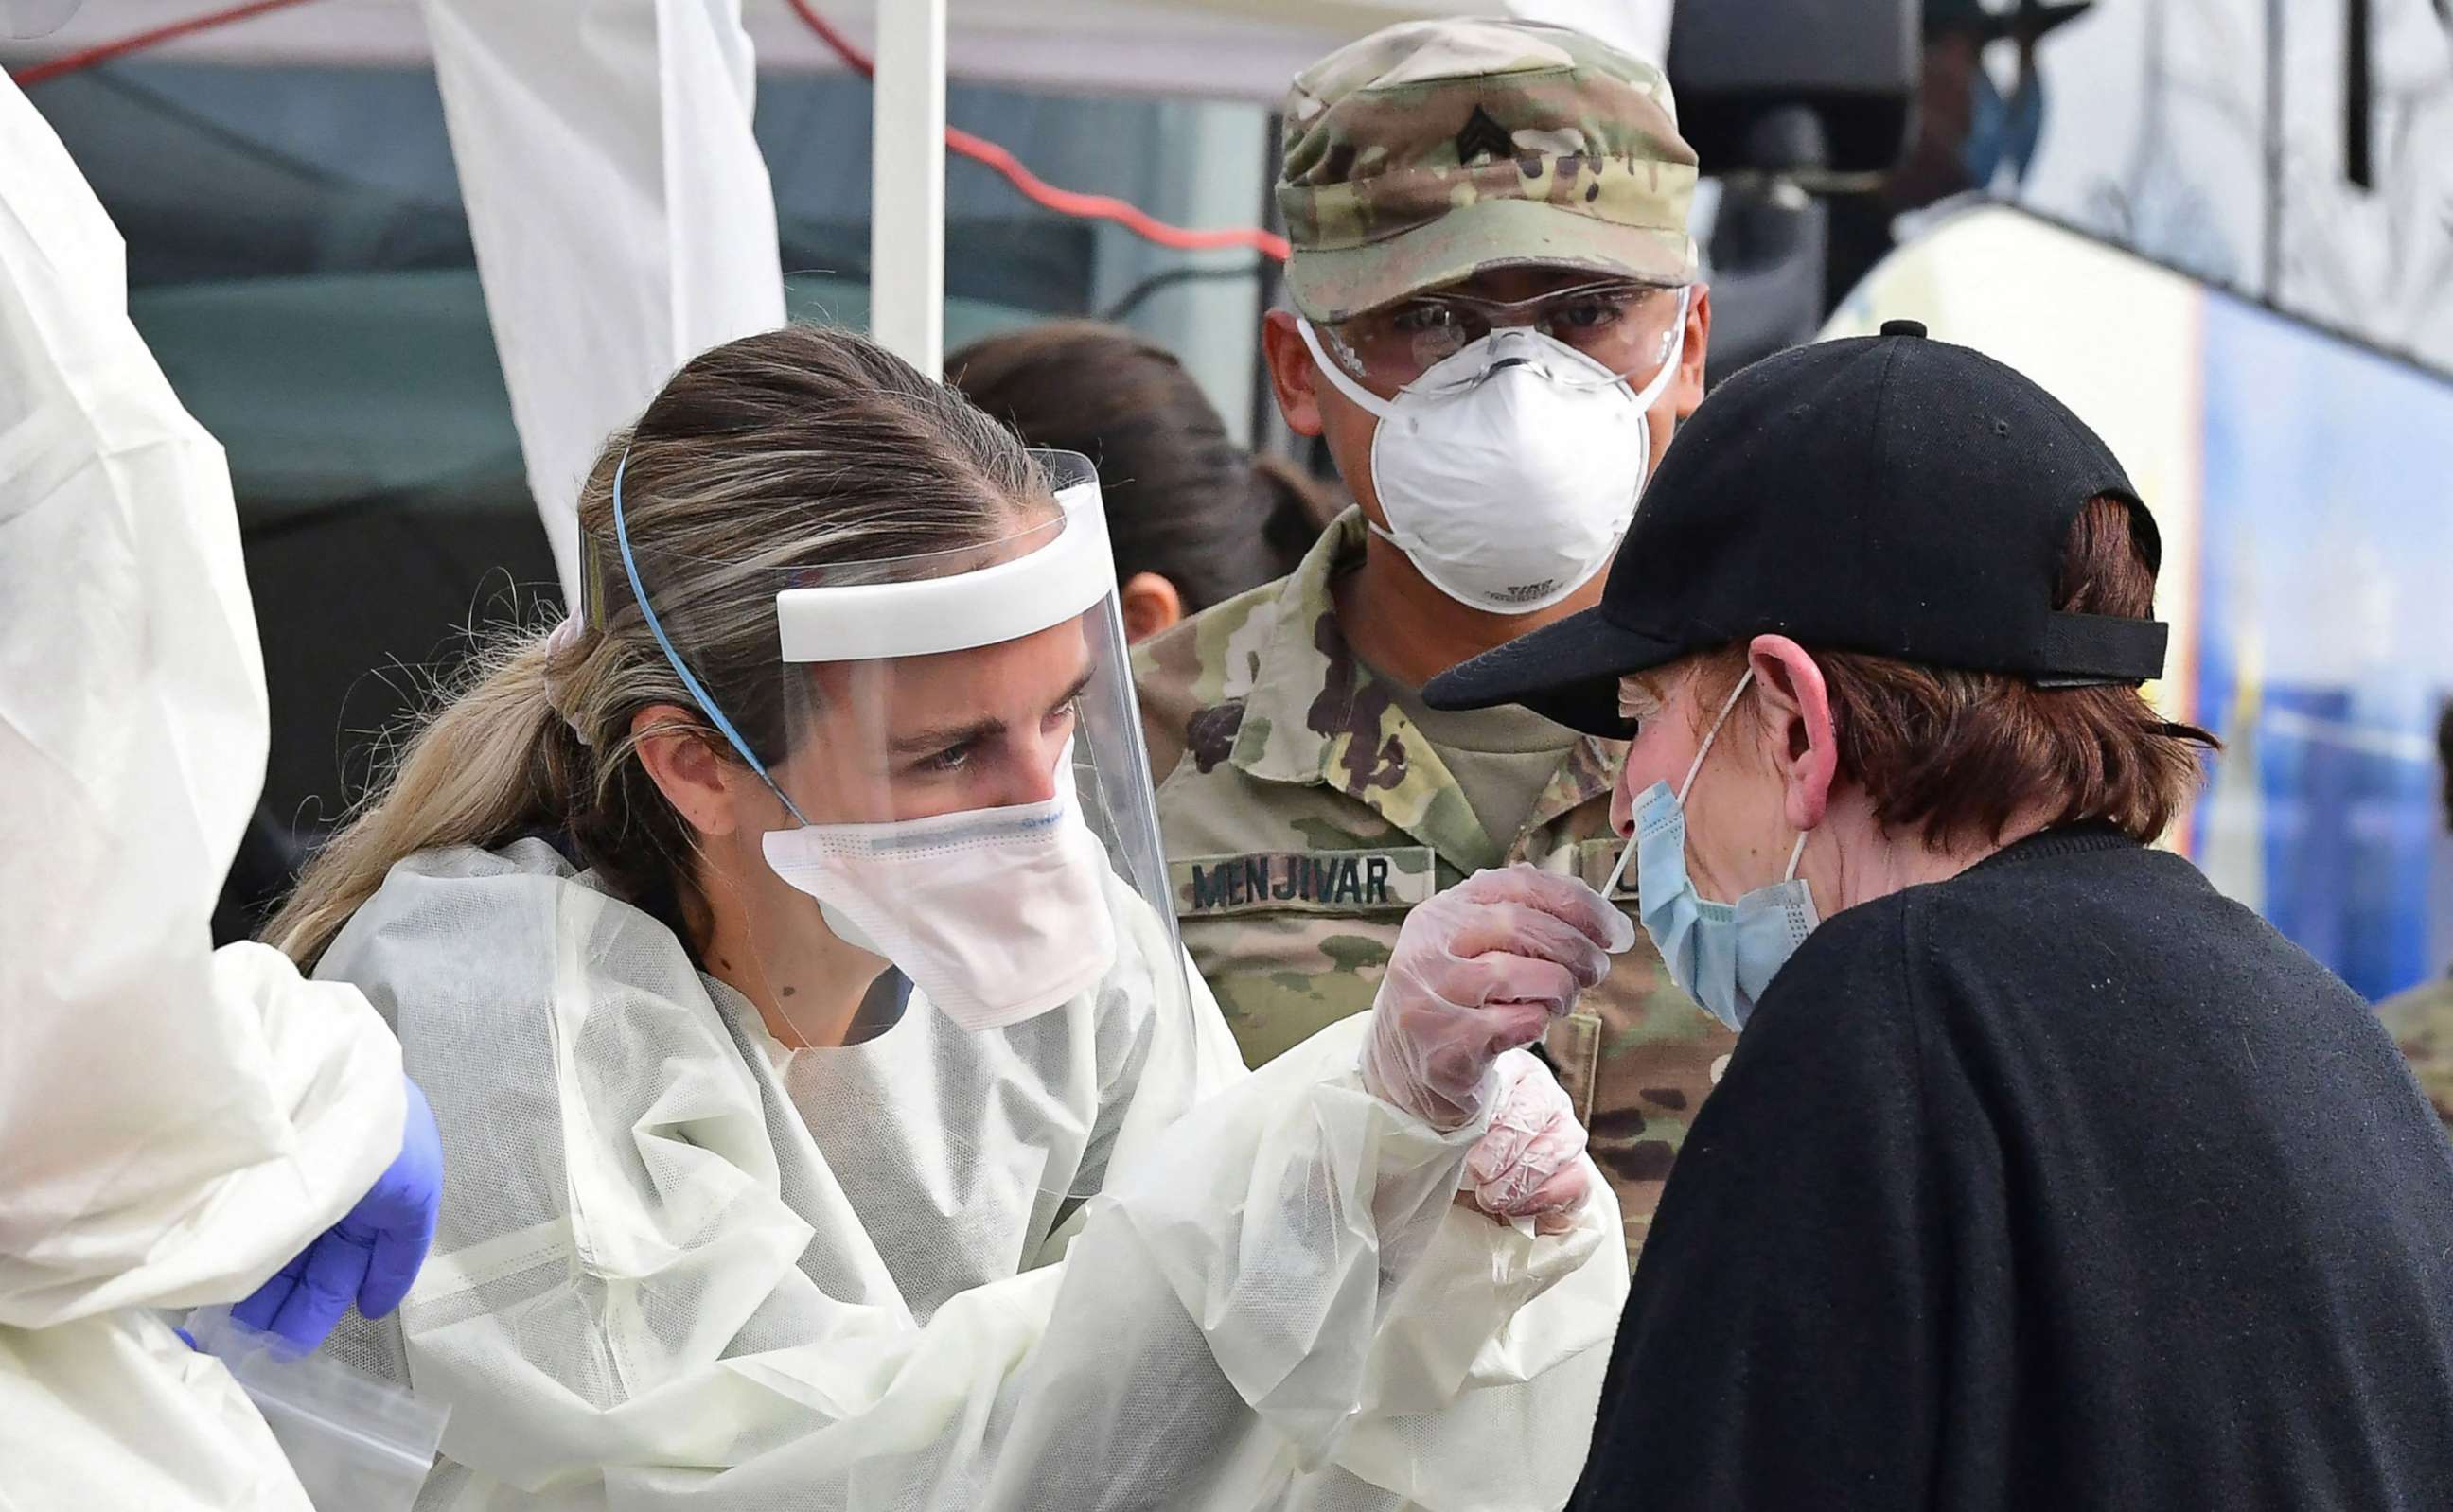 PHOTO: A woman receives help with a nasal swab at an express Covid-19 mobile testing site in Paramount, a city in Los Angeles County, Calif., on Jan. 12, 2022.